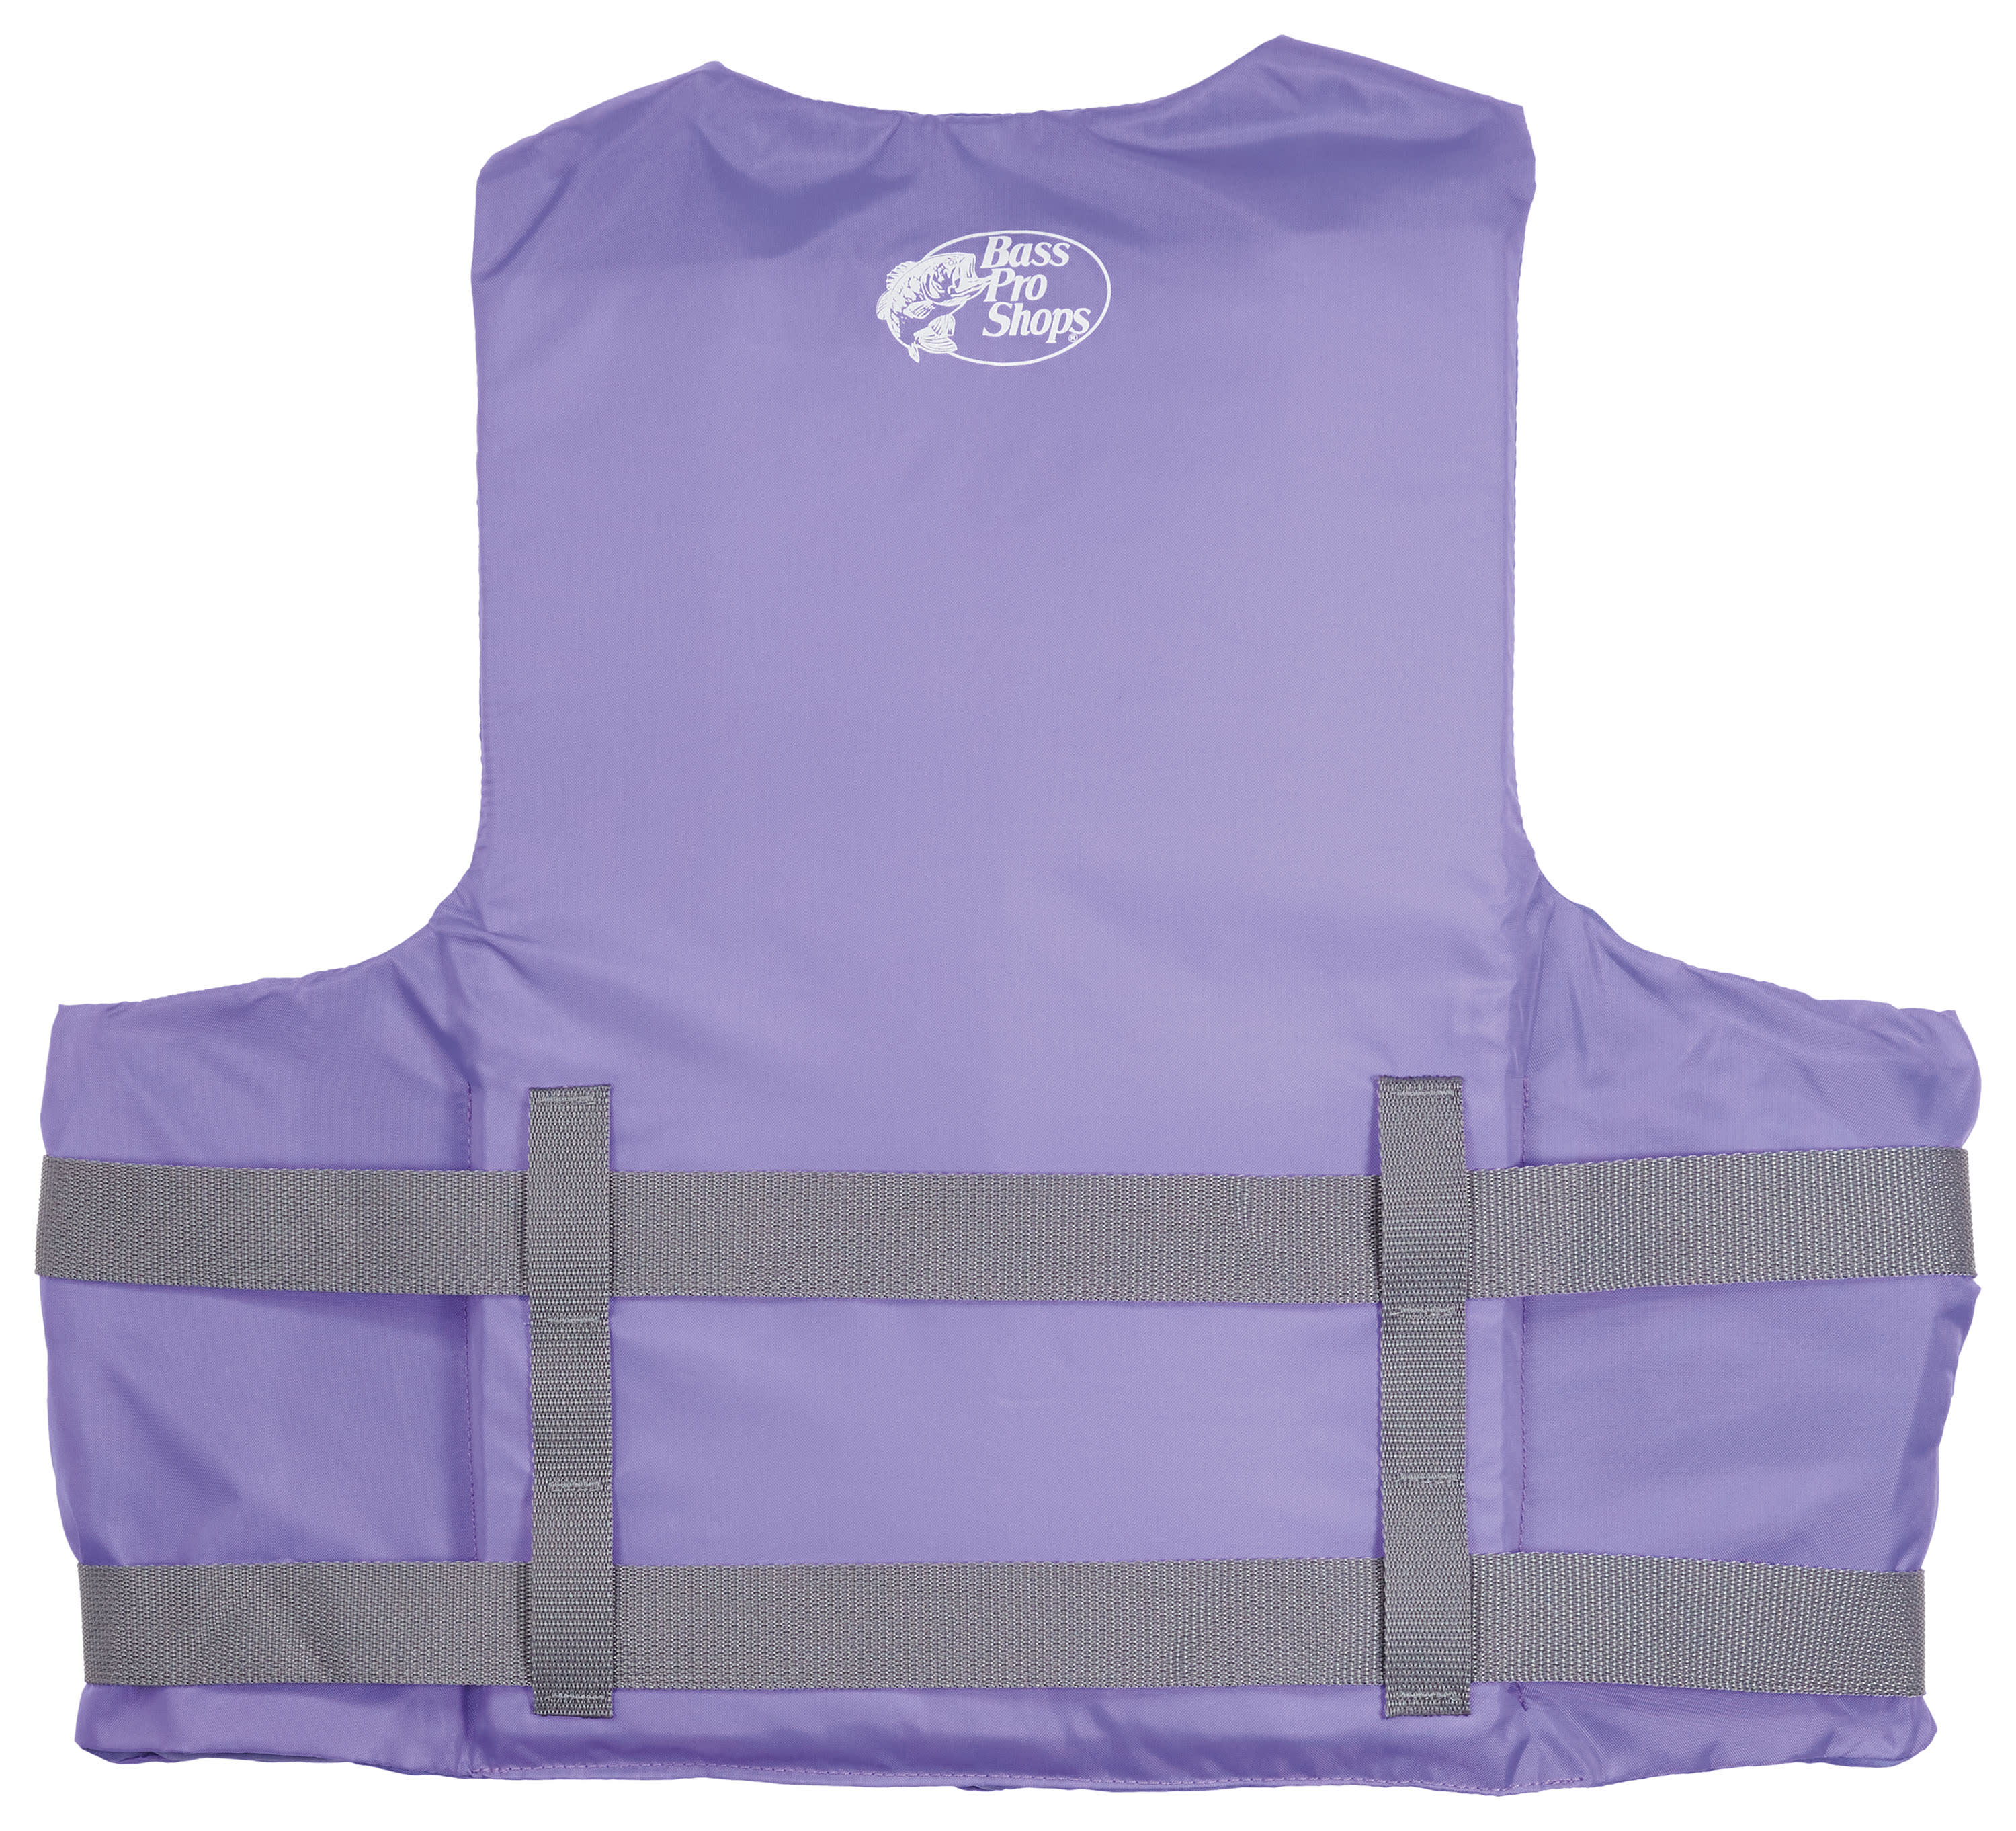 Bass Pro Shops® Recreational Life Jacket for Adults